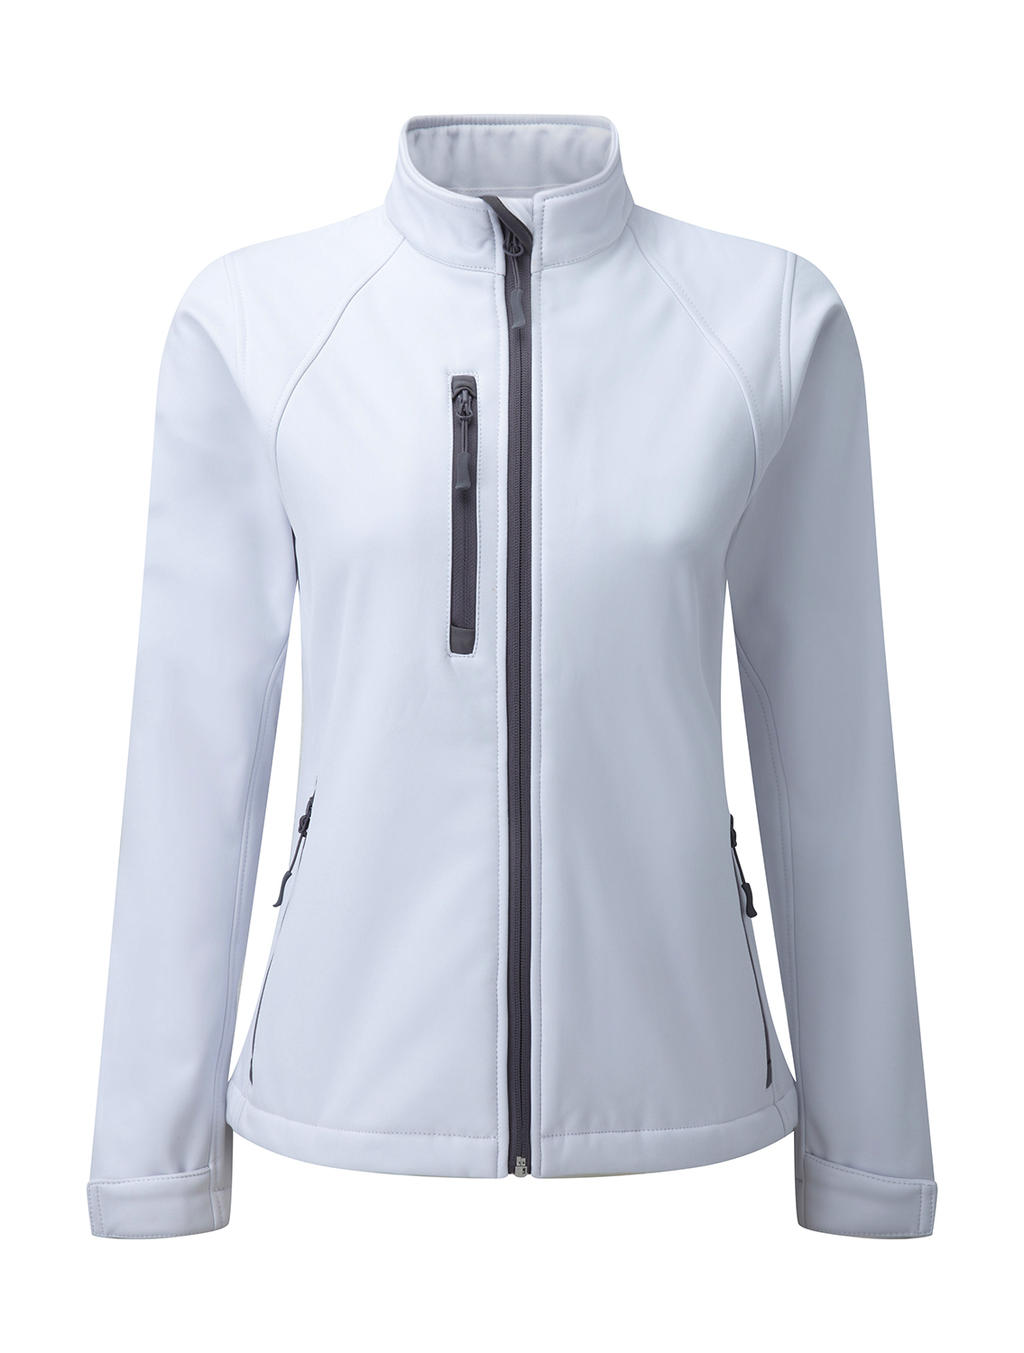  Ladies Softshell Jacket  in Farbe White